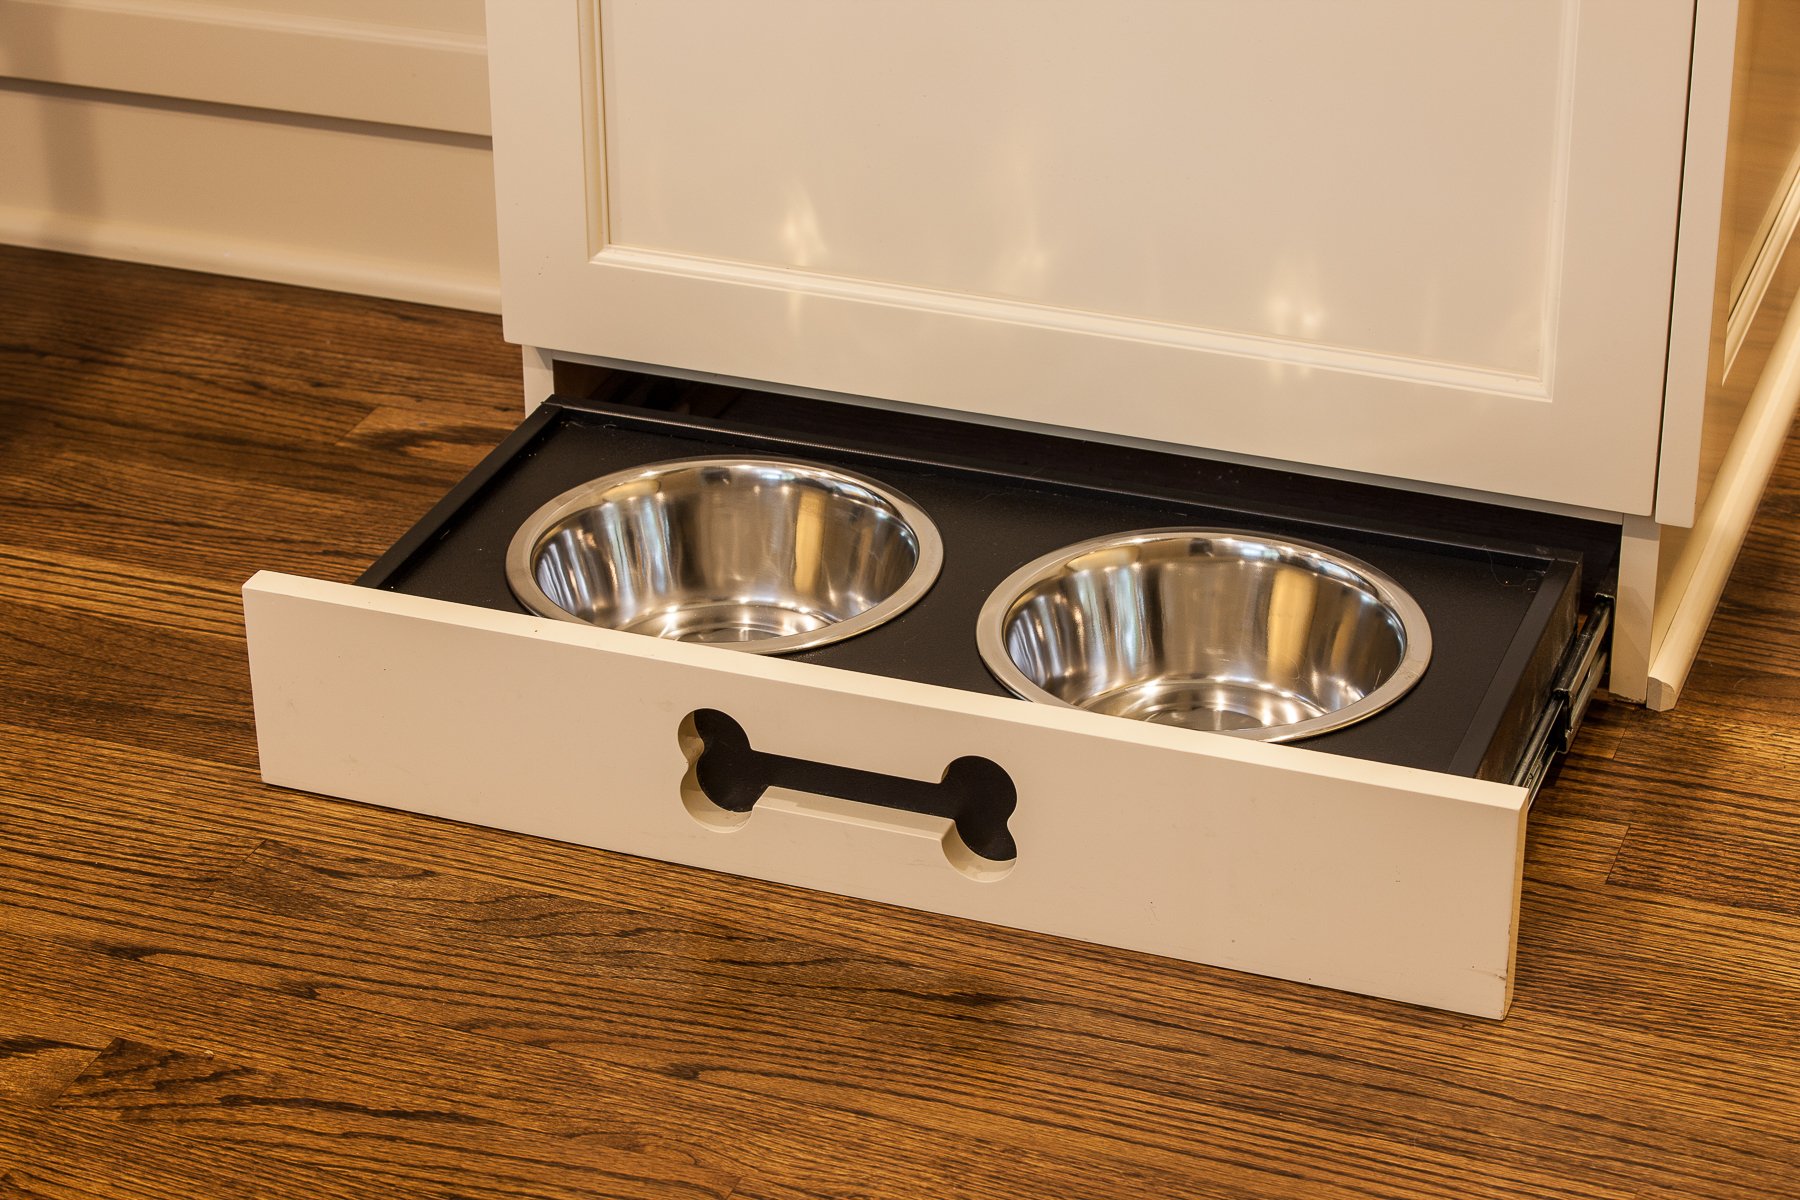 Remodeled kitchen with pull-out dog bowl drawer added under cabinet